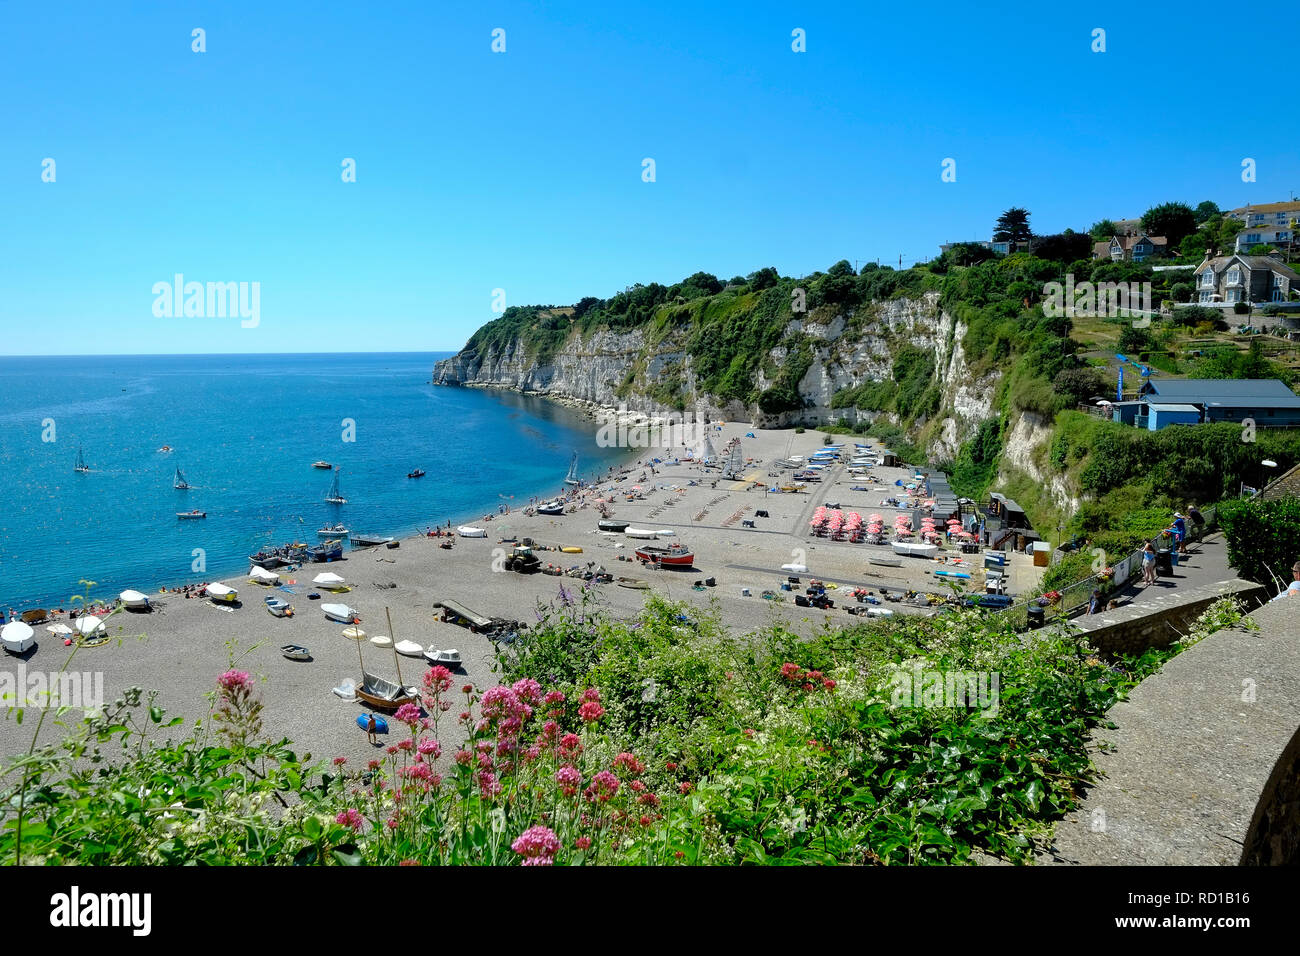 View of the beach at Beer, UNESCO World Heritage Site, East Devon. UK Stock Photo